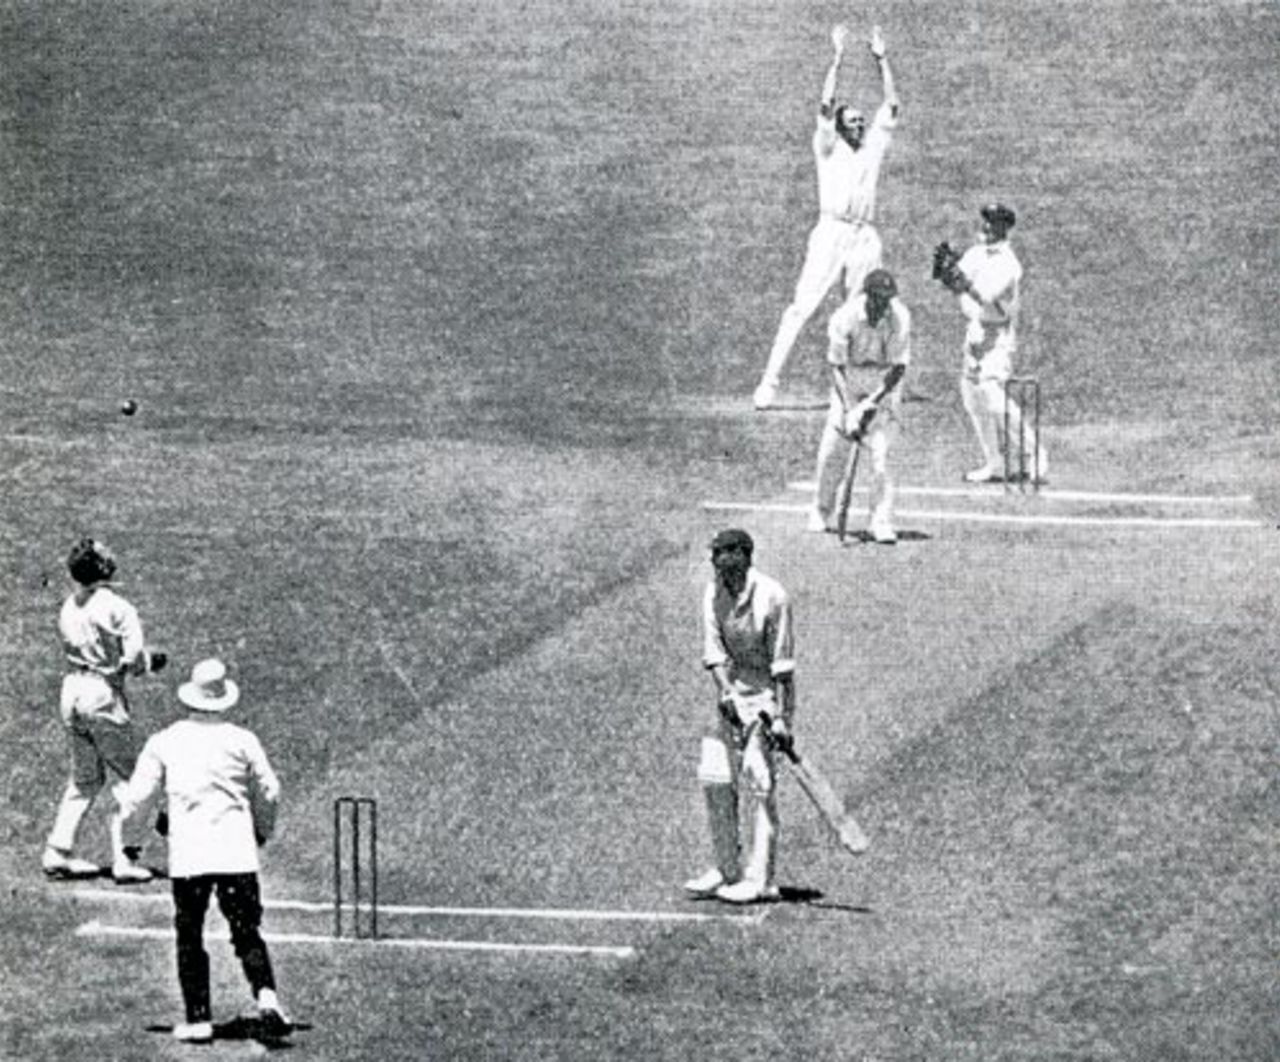 Arthur Gilligan is caught and bowled by Arthur Mailey first ball, Australia v England, 2nd Test, Melbourne  January 8, 1925